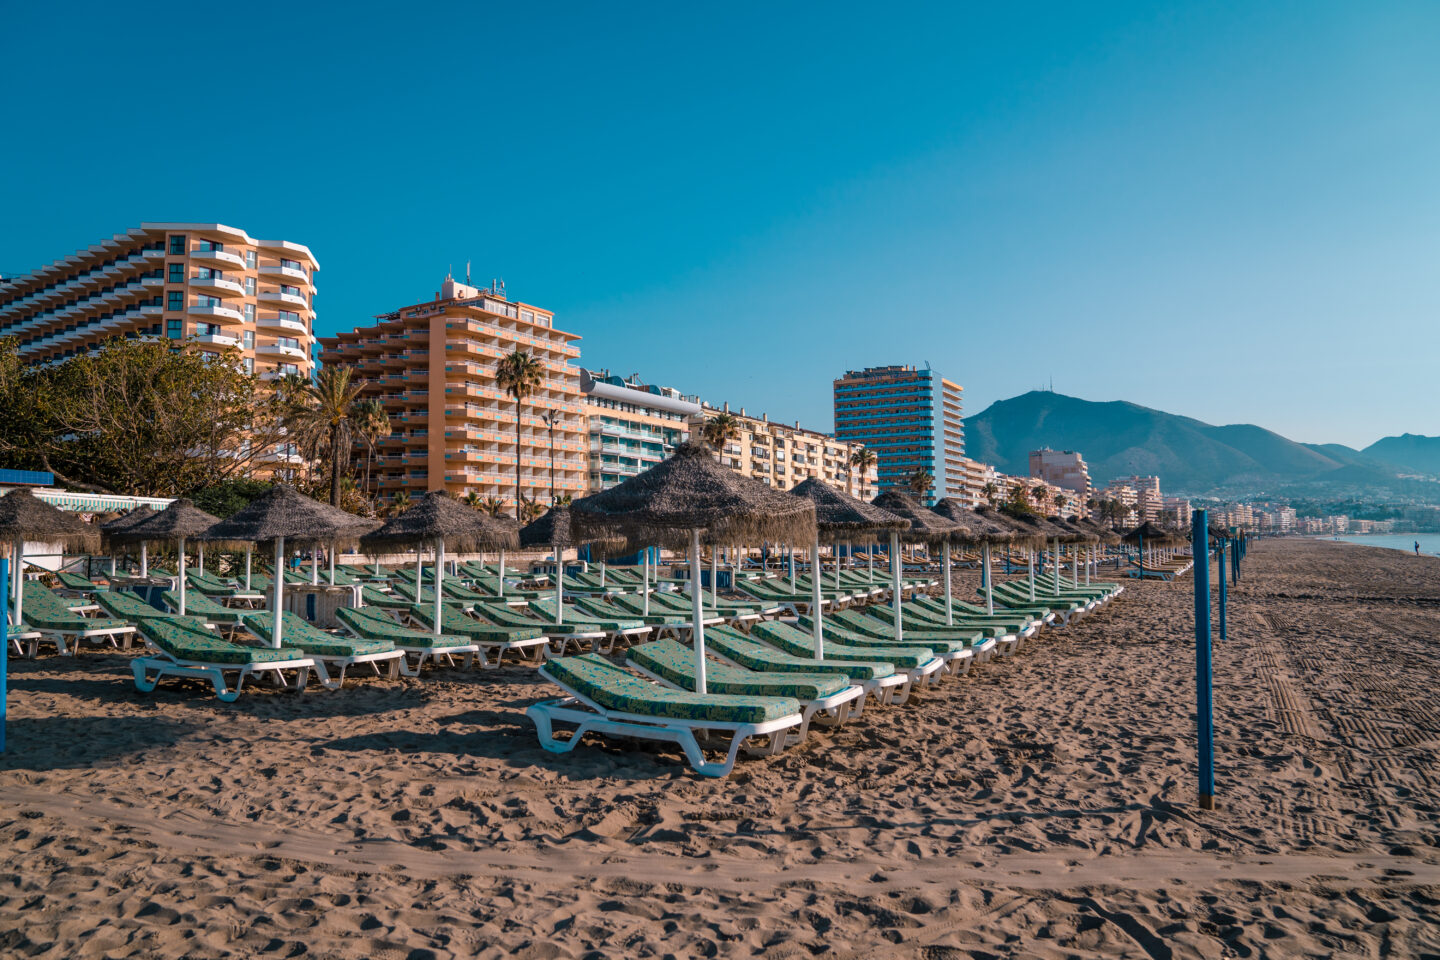 Sun chairs on a beach in Fuengirola, Costa delSol